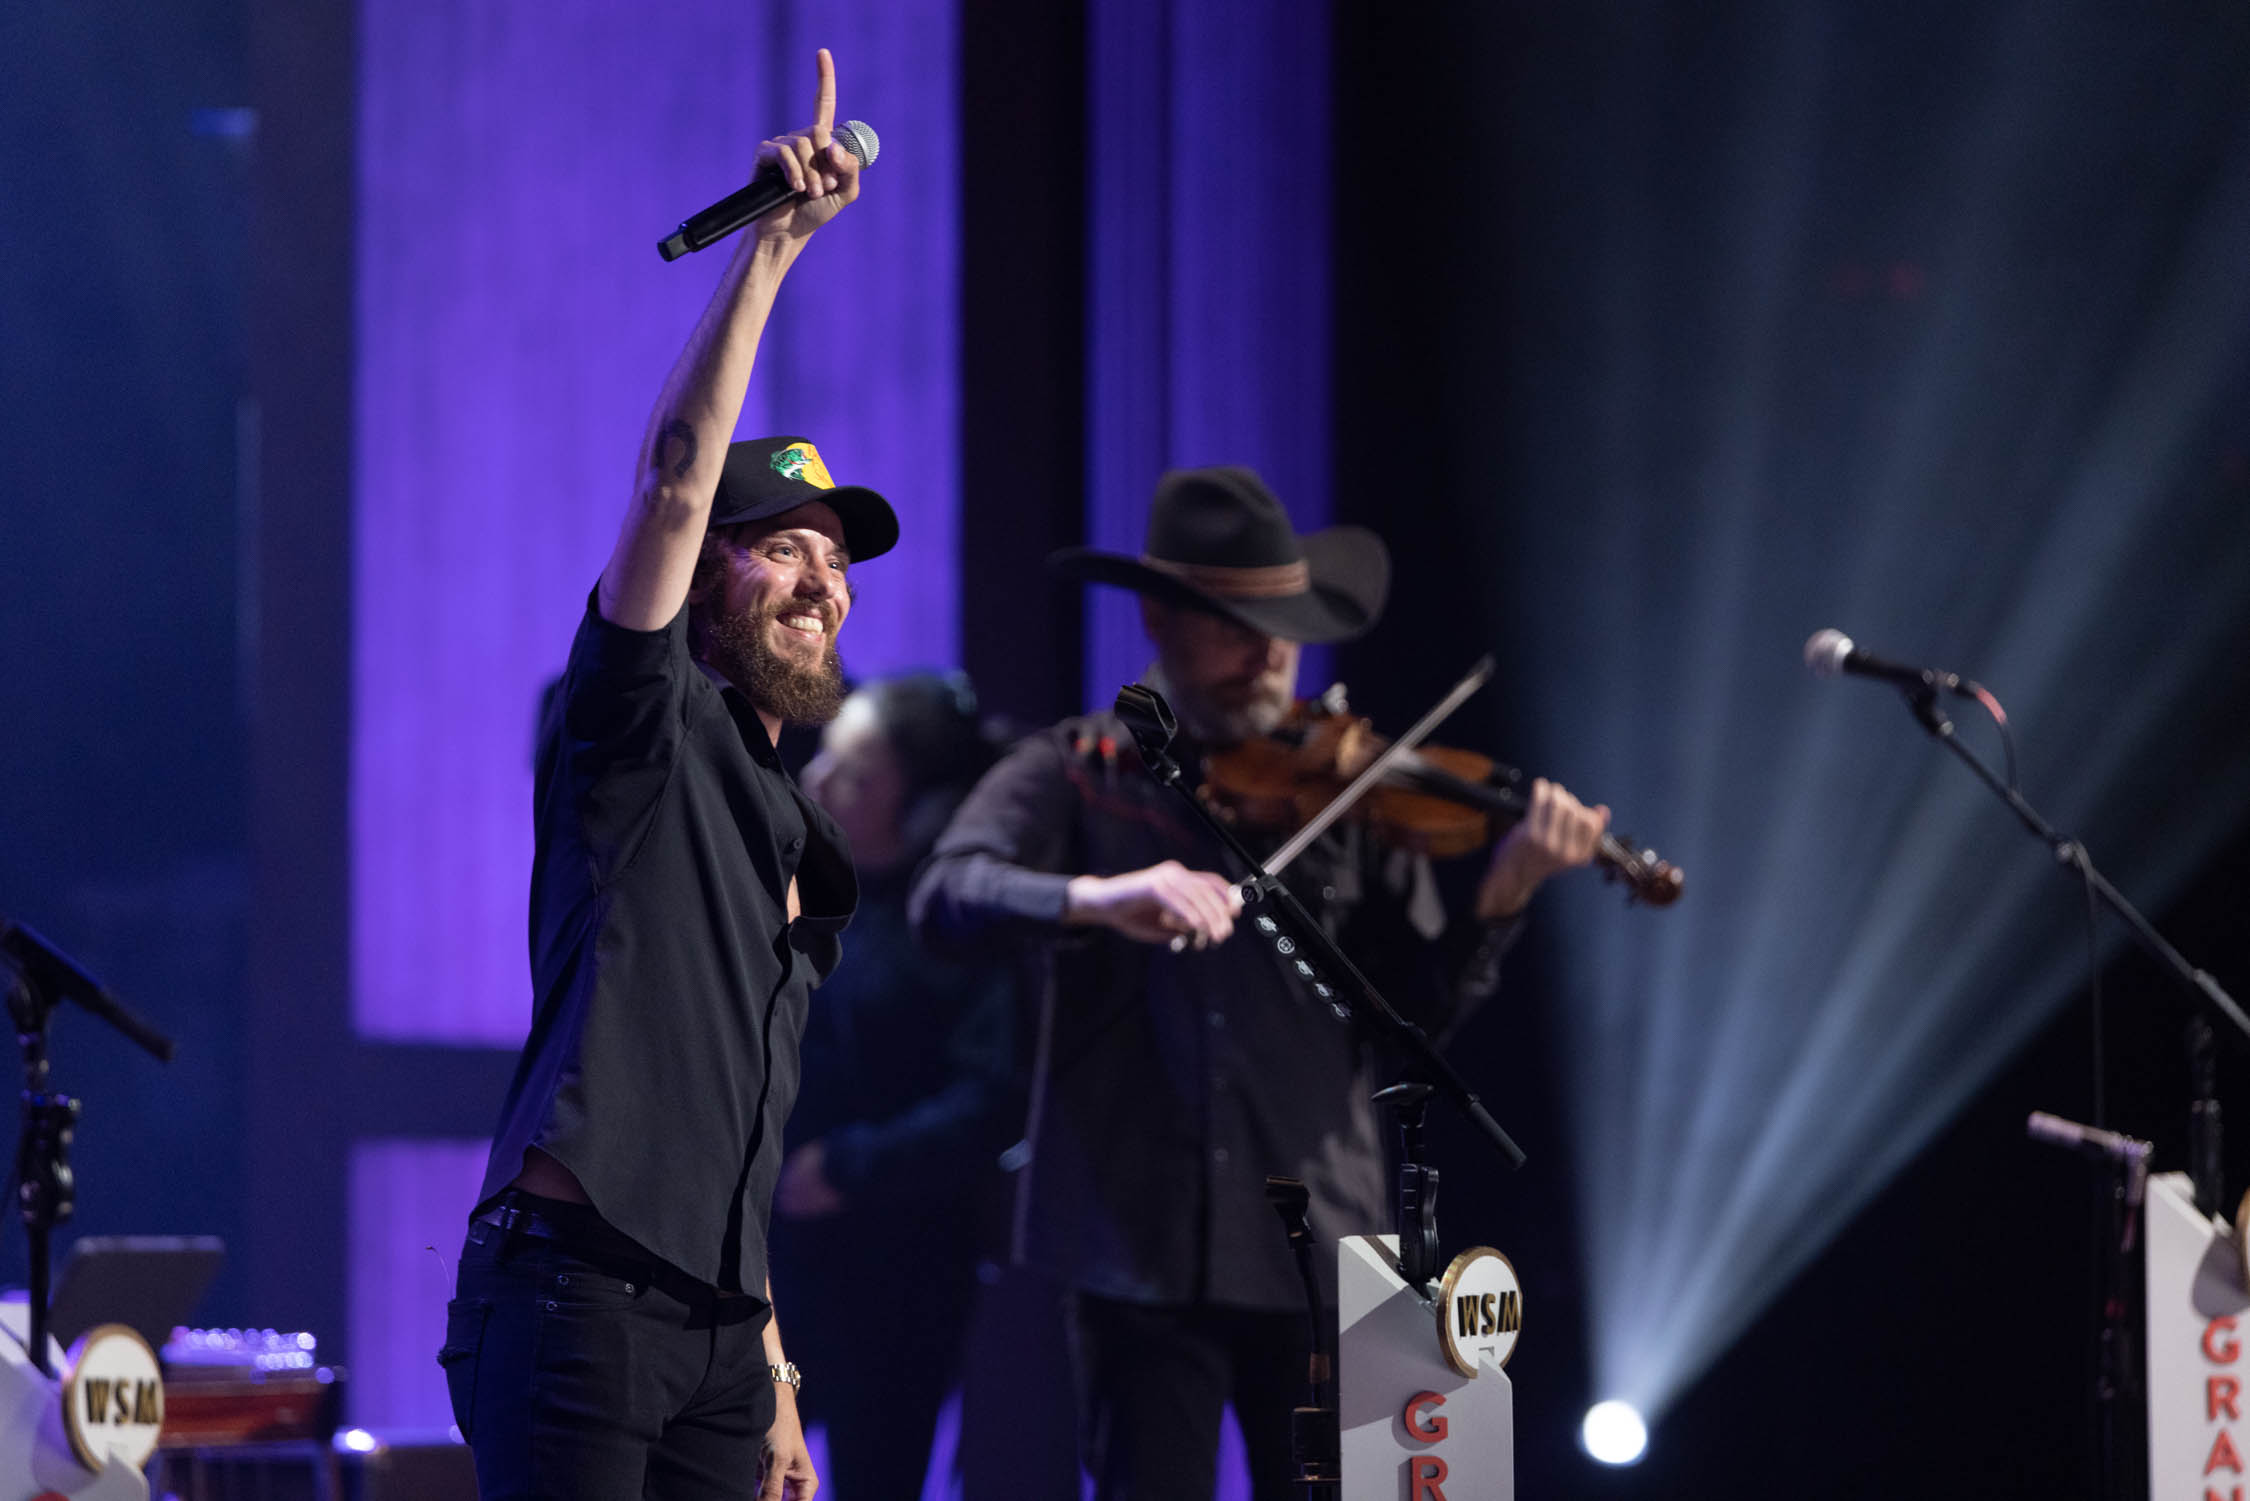 TUNE IN: CHRIS JANSON CIRCLE NETWORK TAKEOVER THIS SATURDAY, MAY 7